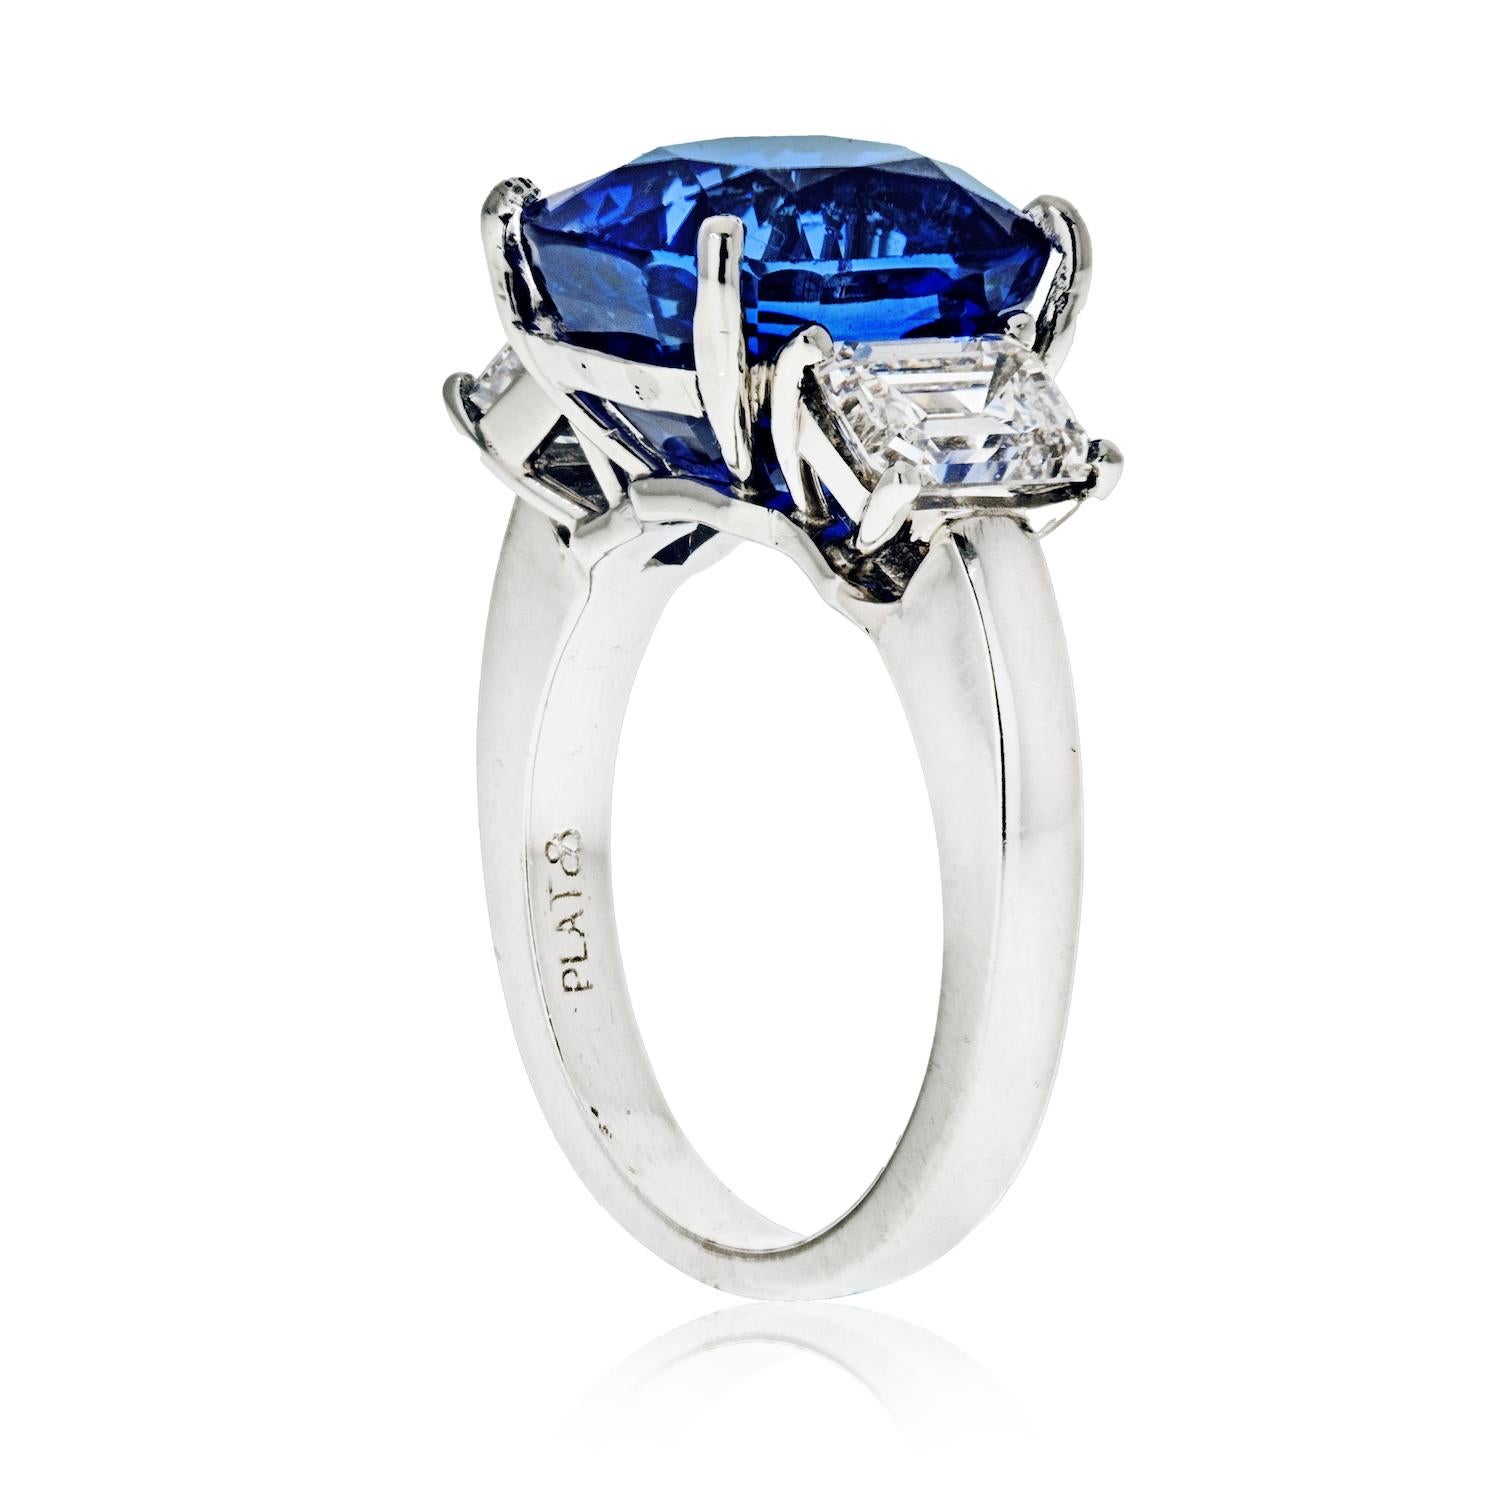 This stunning 8.86 carat blue sapphire and diamond three-stone ring is crafted in luxurious platinum. 

Showcasing a cushion-shaped all-natural, no heat, no treatment blue sapphire weighing 8.86 carats, and accompanied by its AGL lab report.